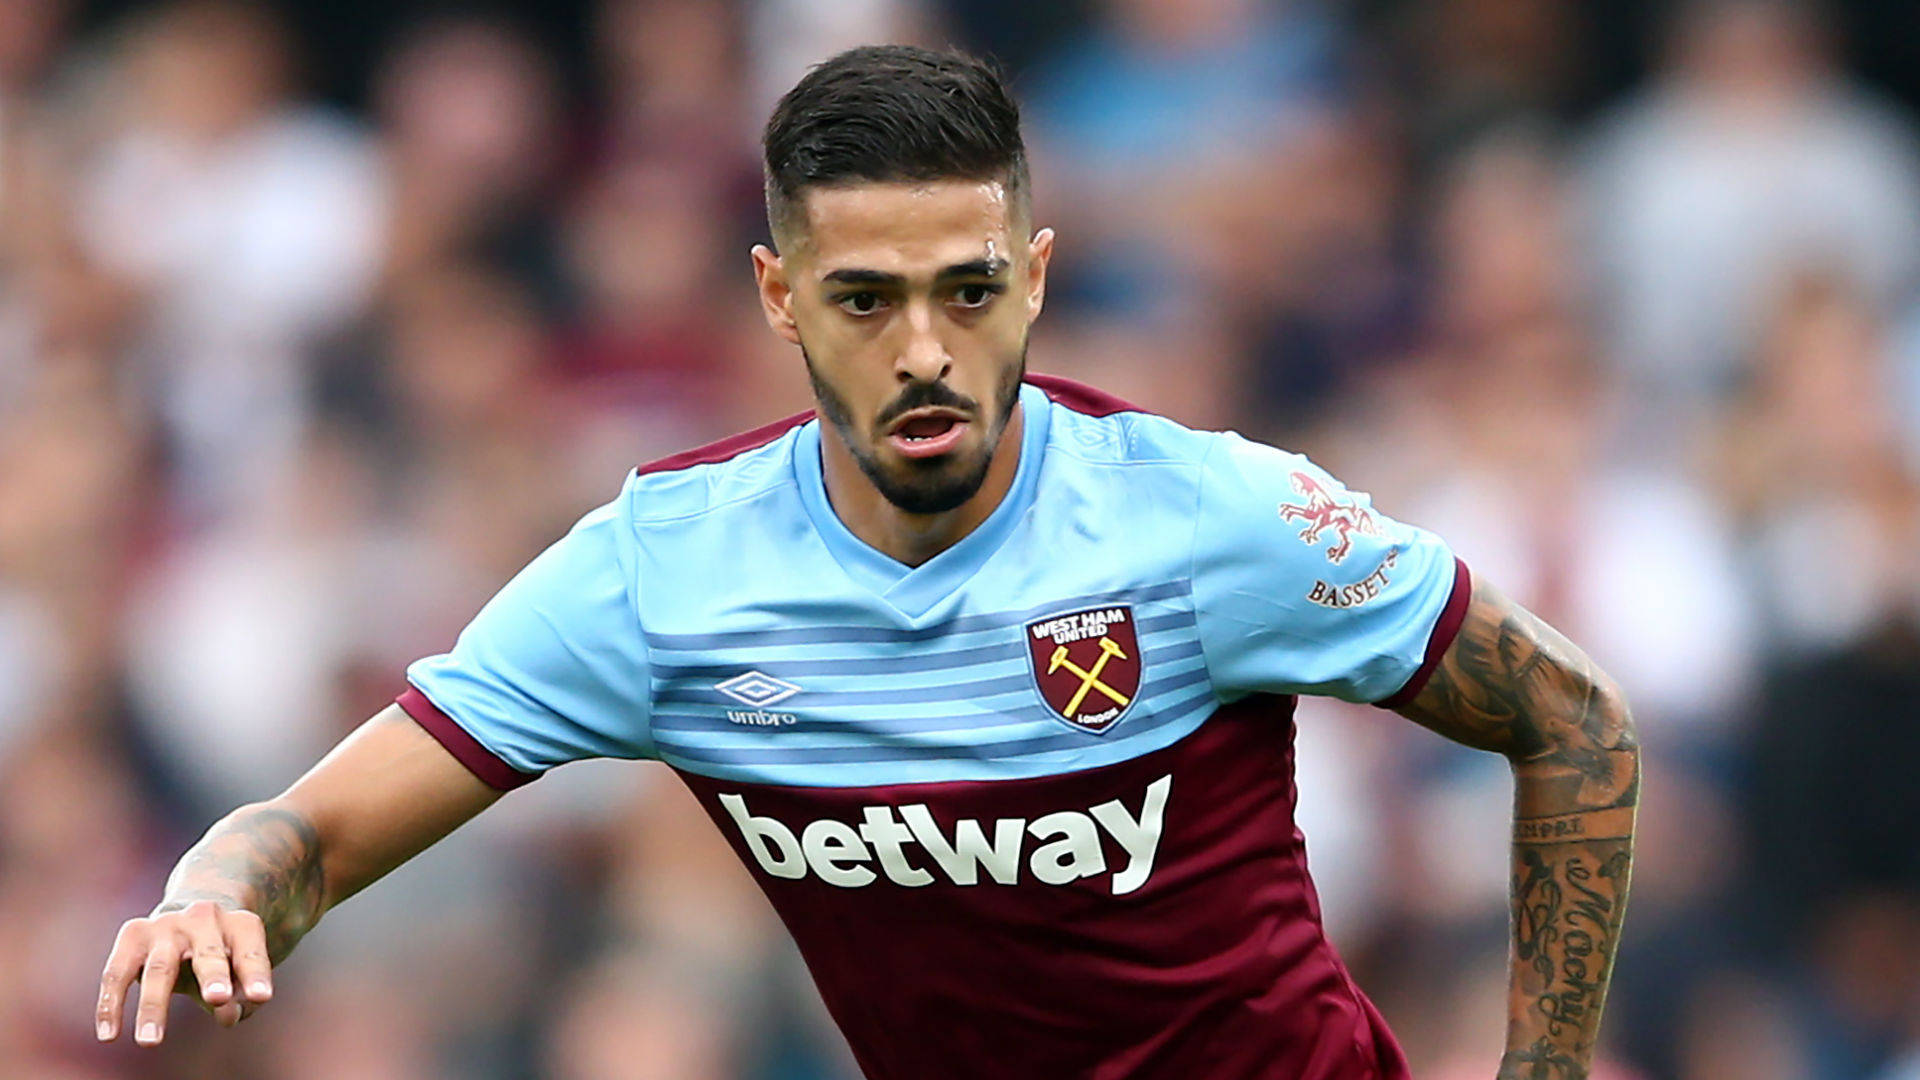 Manuel Lanzini Immersed In Playing Football Wallpaper